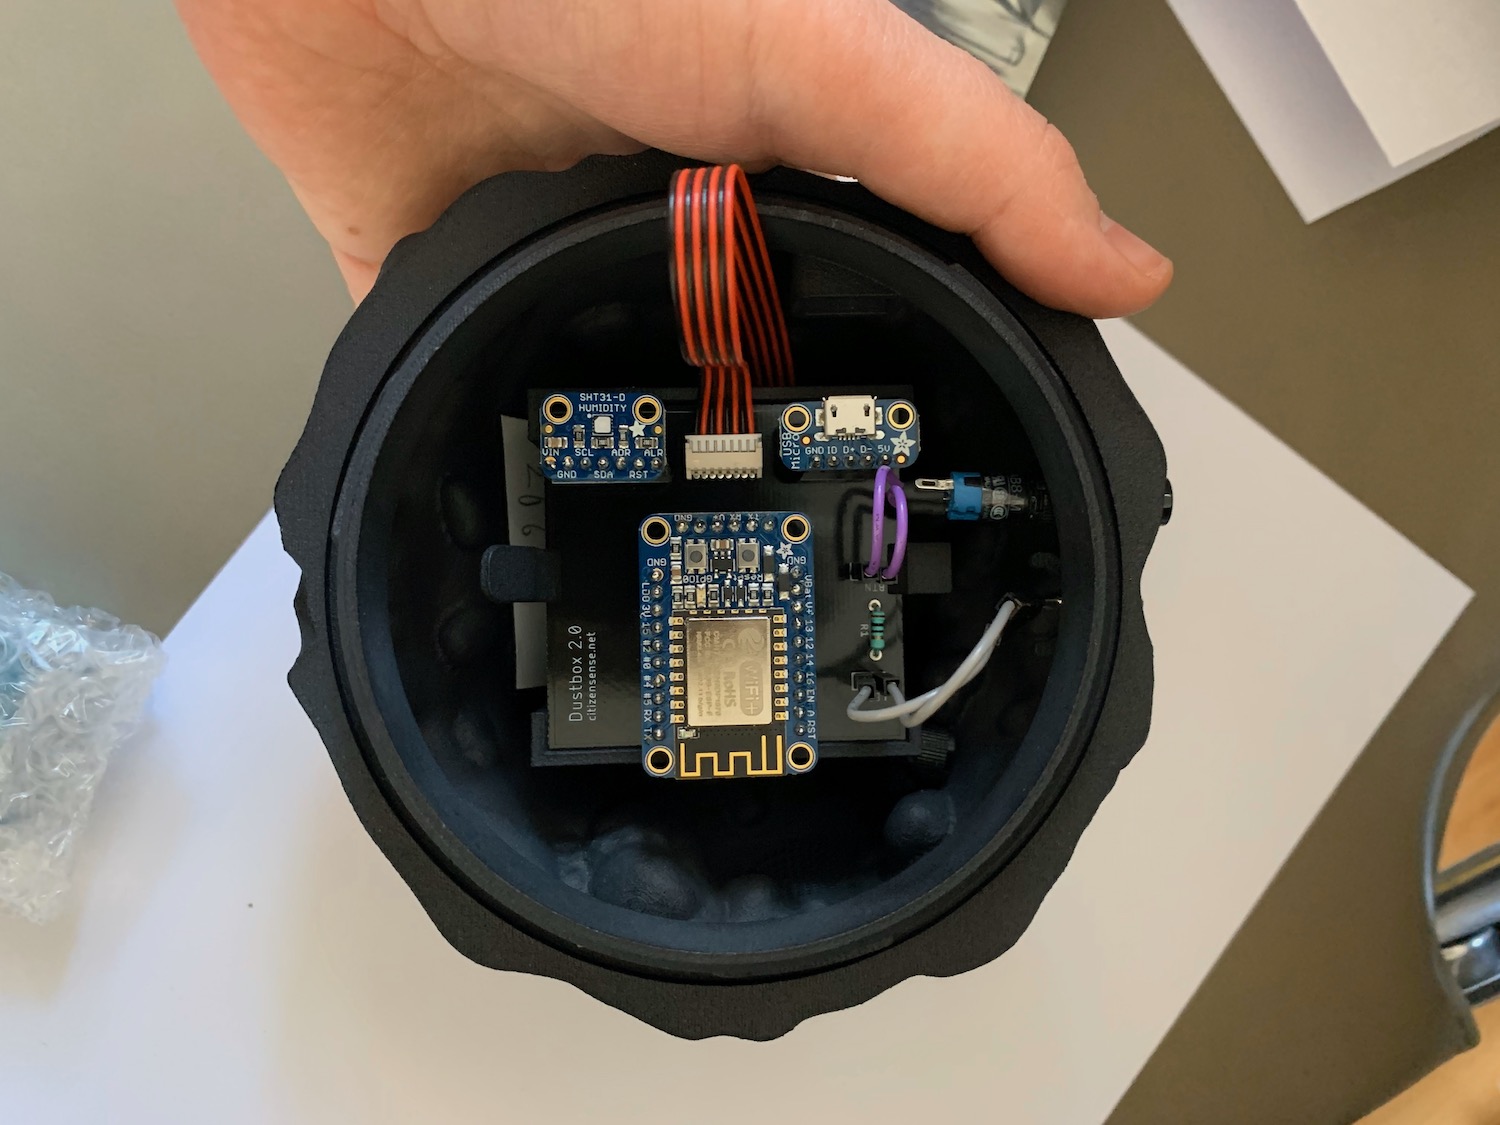 The bottom of the diesel char Dustbox 2.0 enclosure with button, LED, sensor and PCB attached